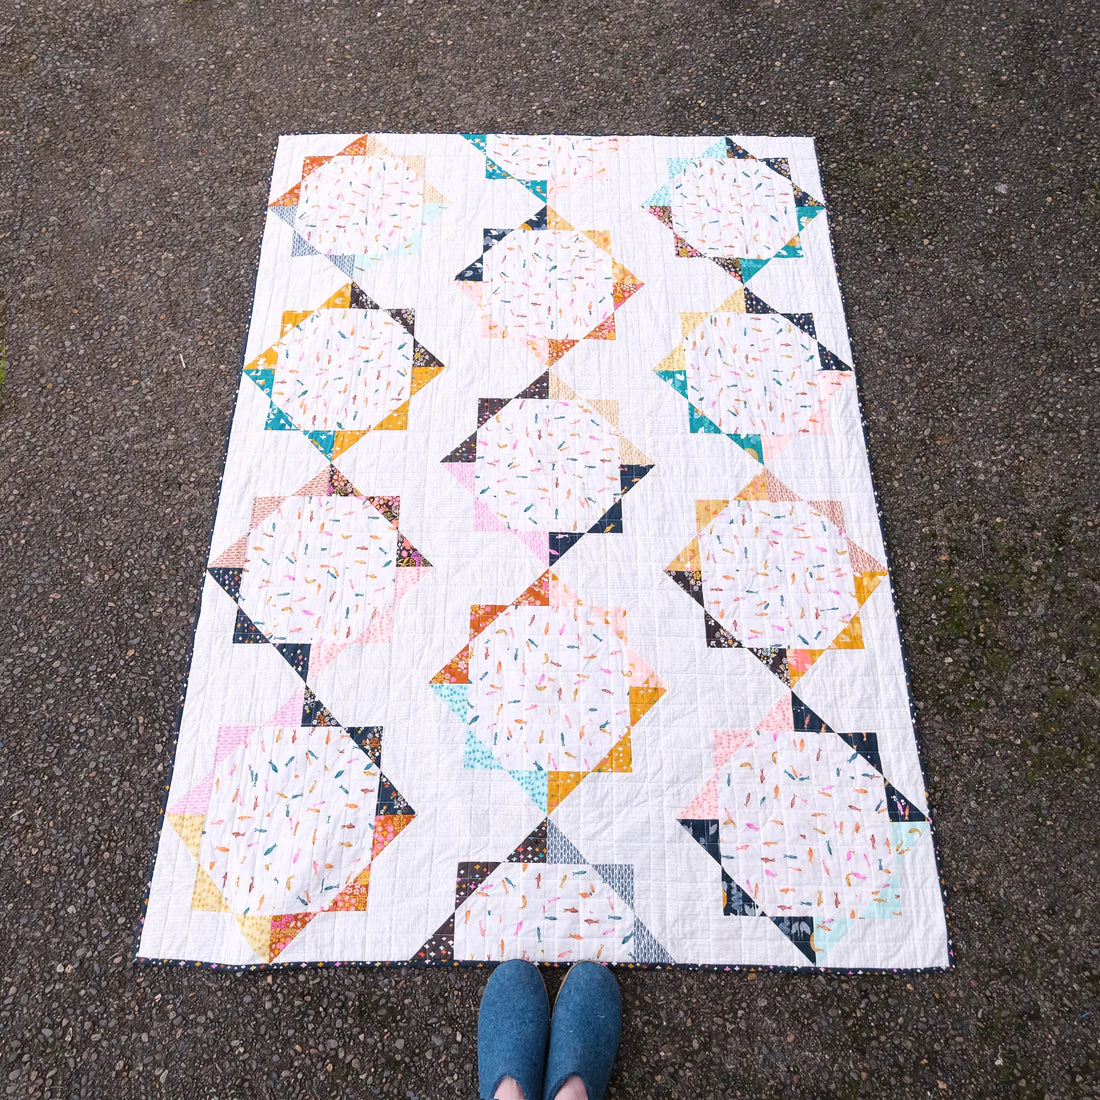 Kitchen Table Quilting - The Gracie Quilt Pattern